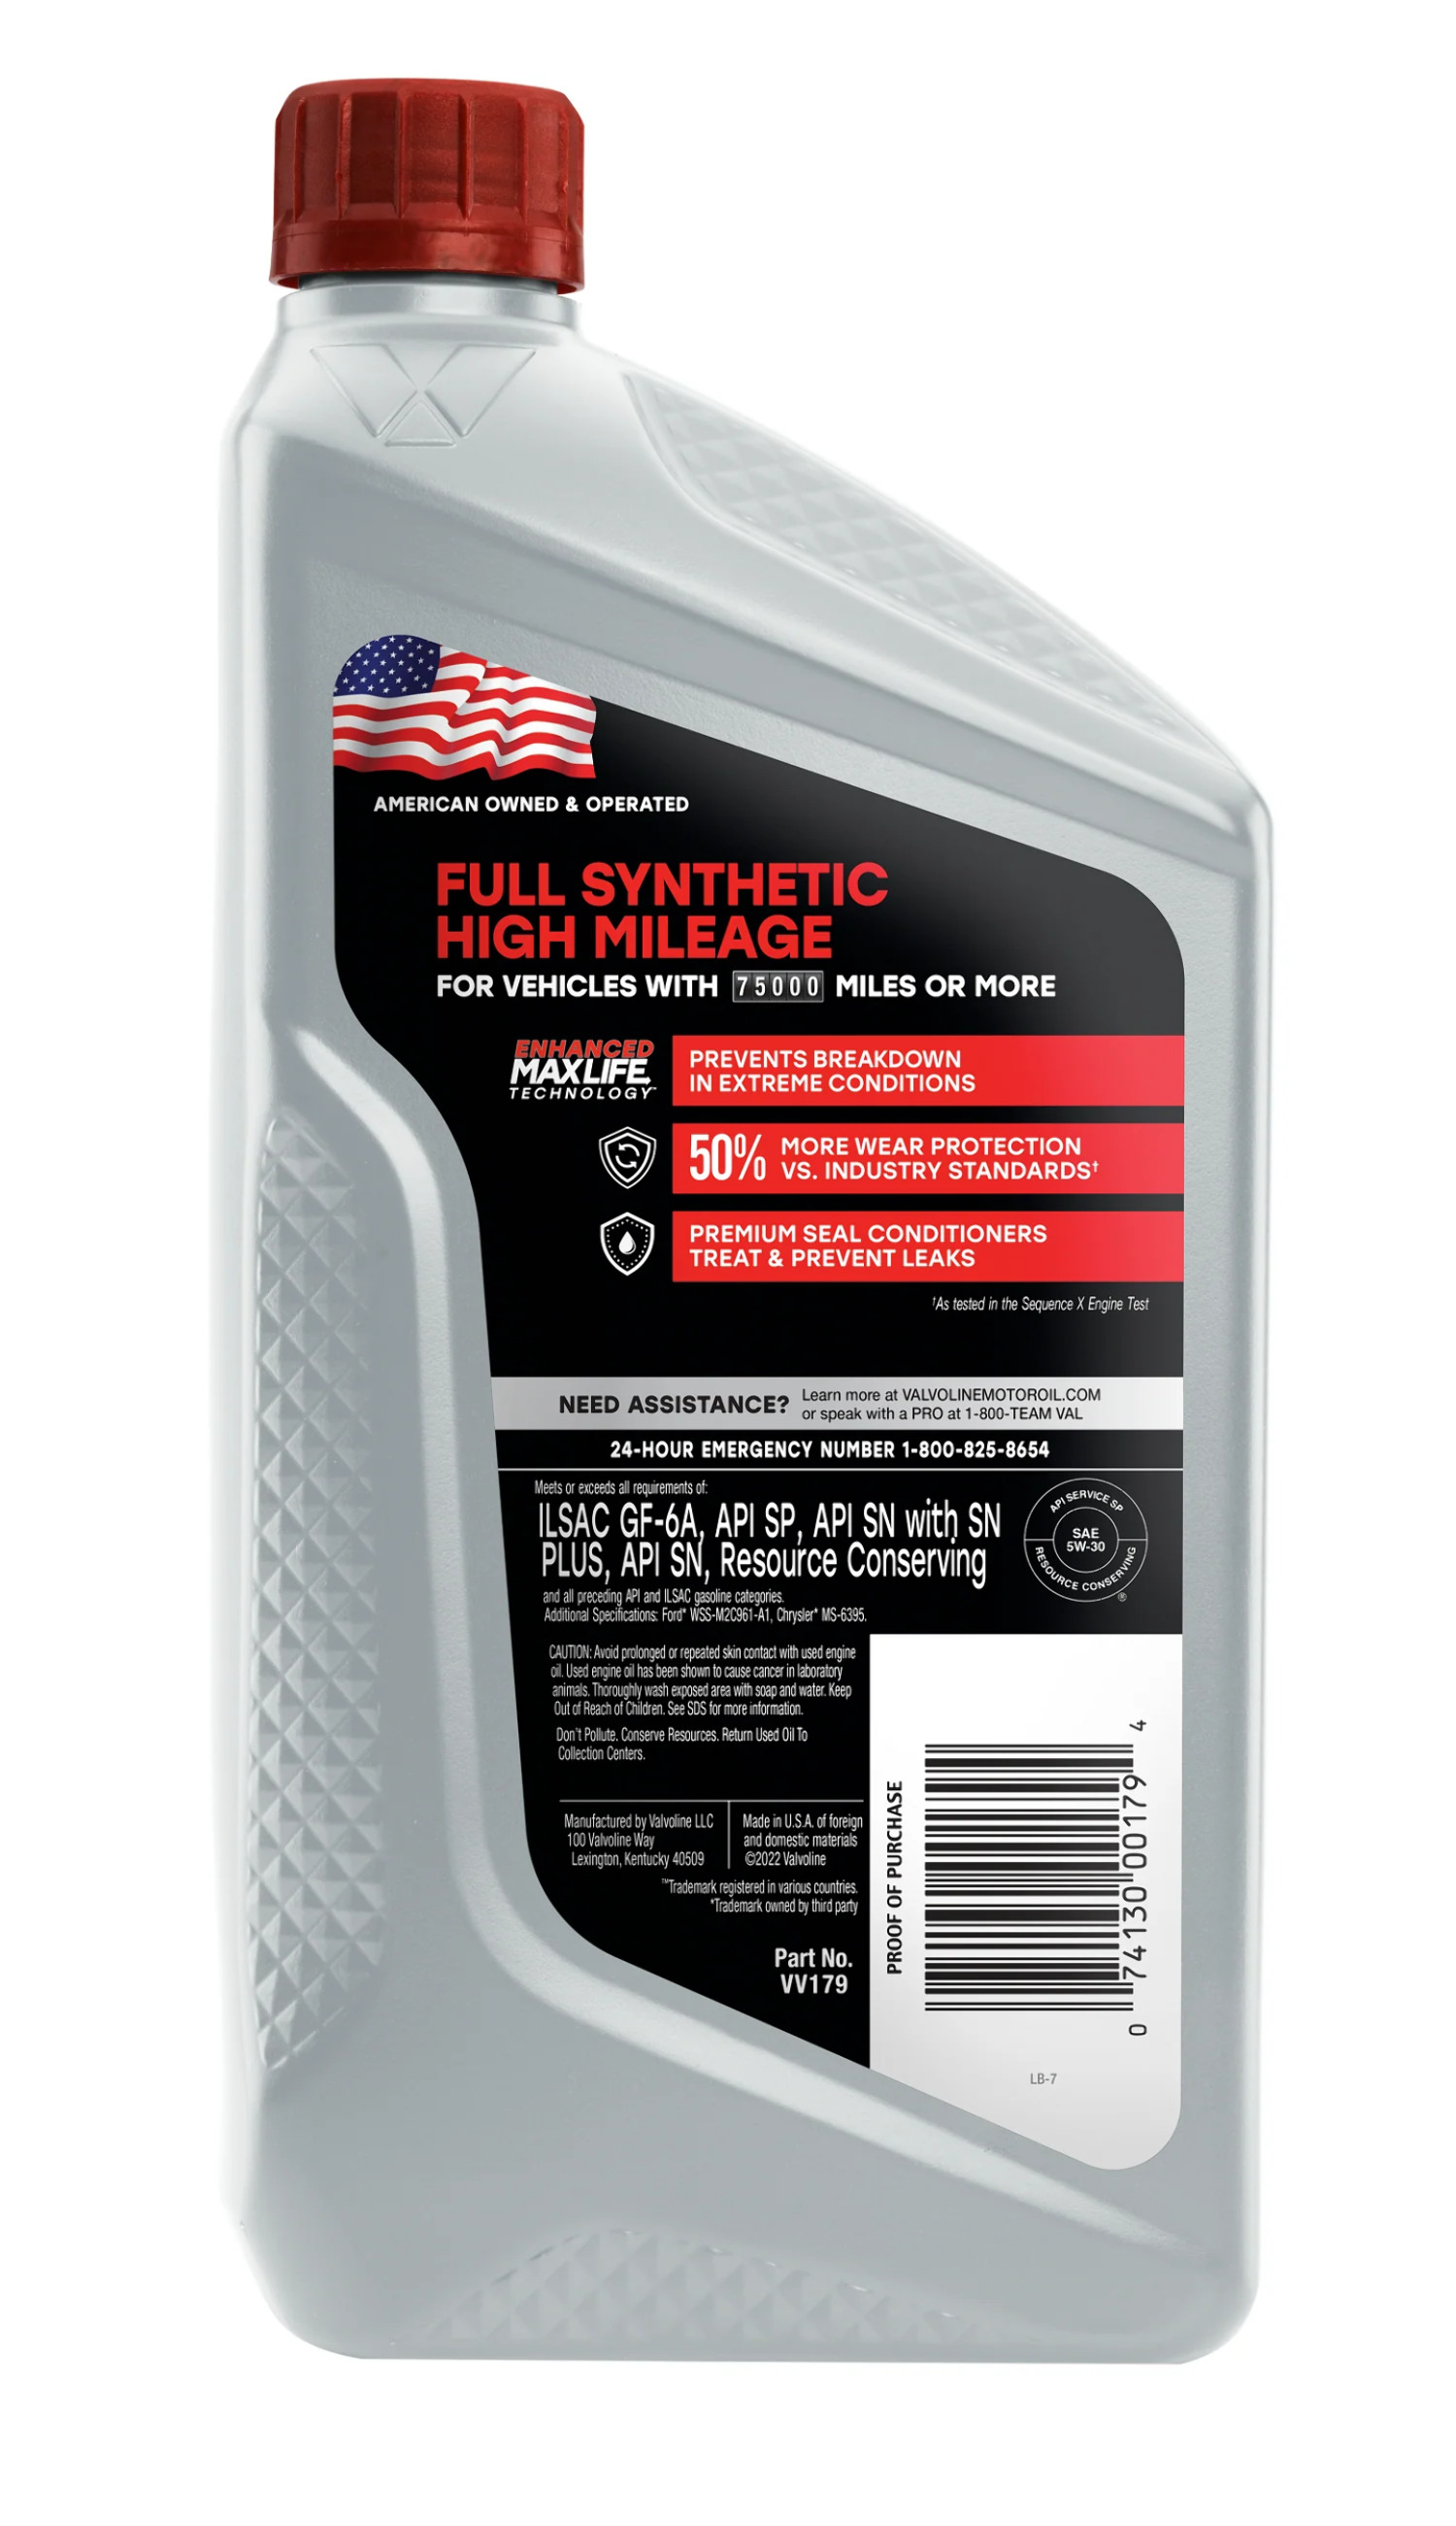 Valvoline Full Synthetic High Mileage with MaxLife Technology Motor Oil SAE 5W-30 - image 4 of 12